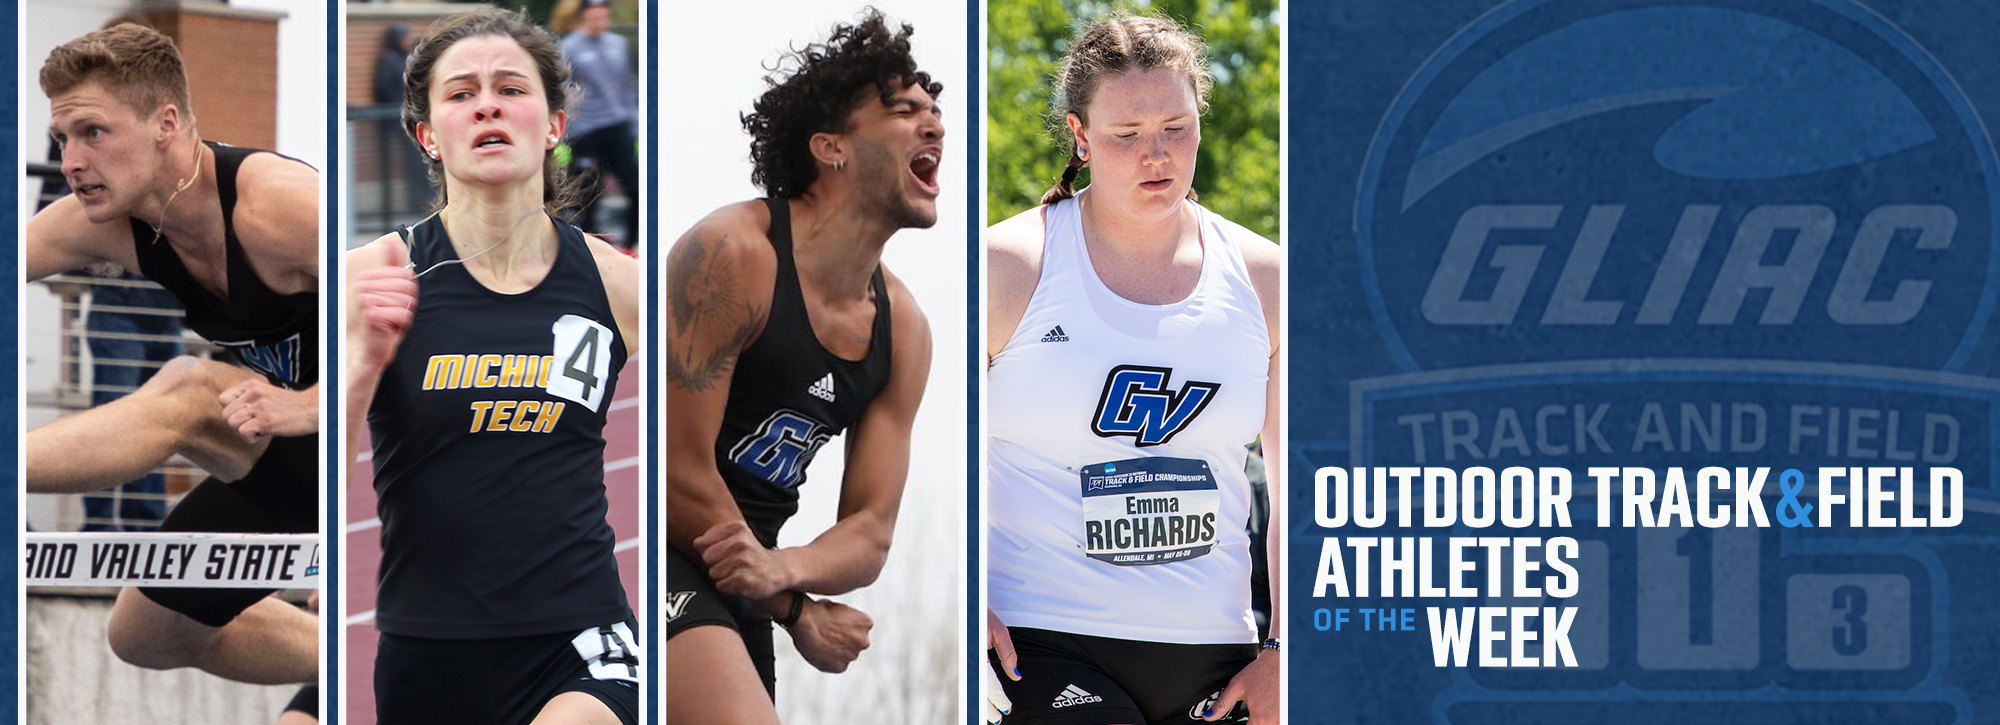 GLIAC announces outdoor track & field athletes of the week